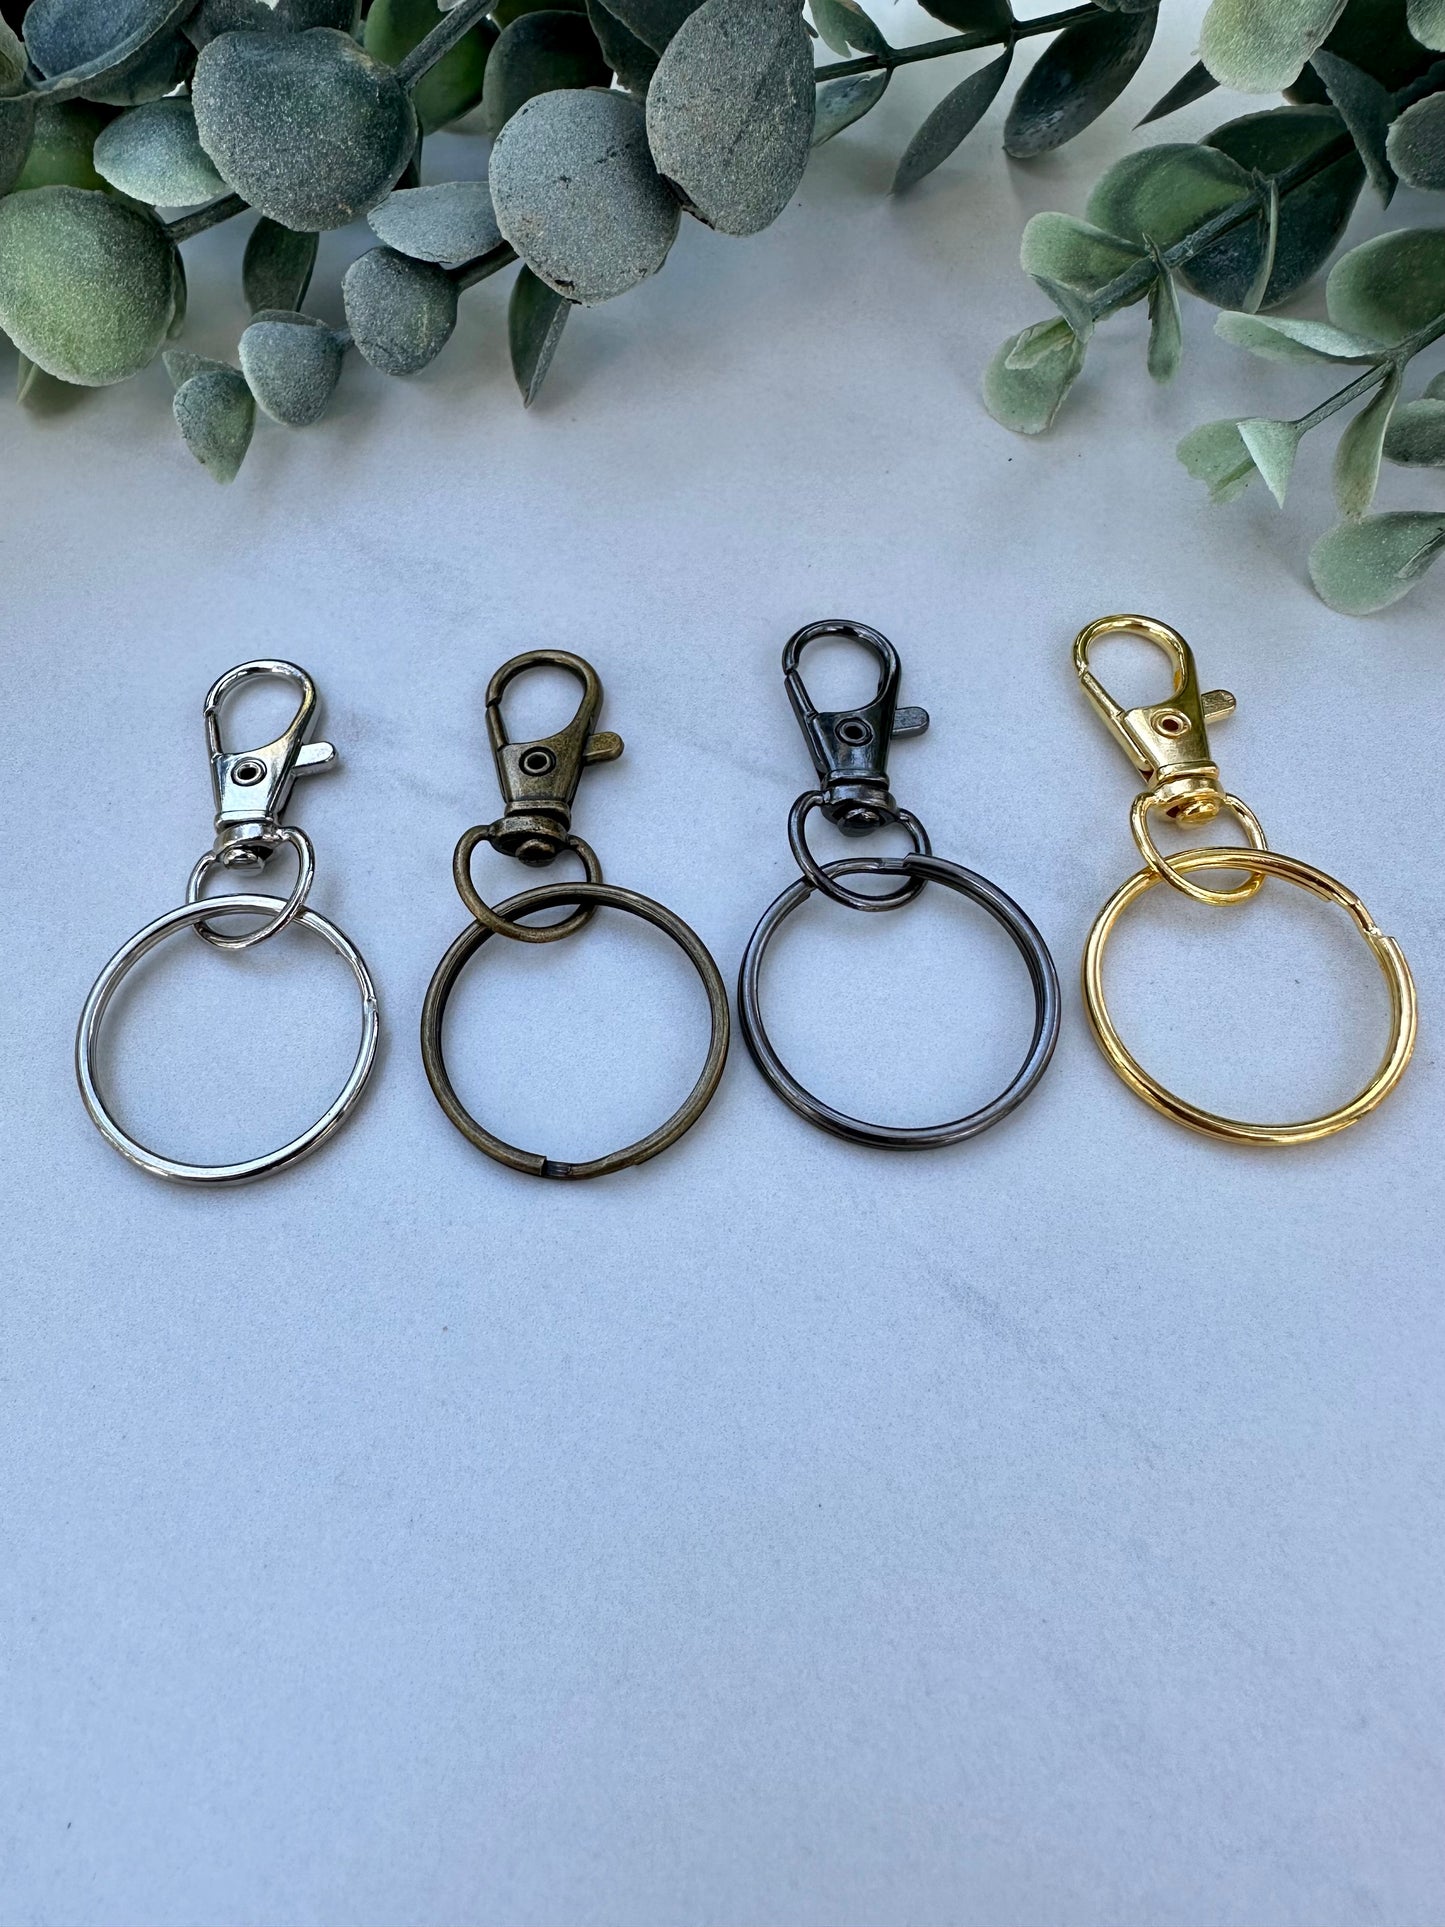 The Best Therapist Have Fur and Four Legs Keychain